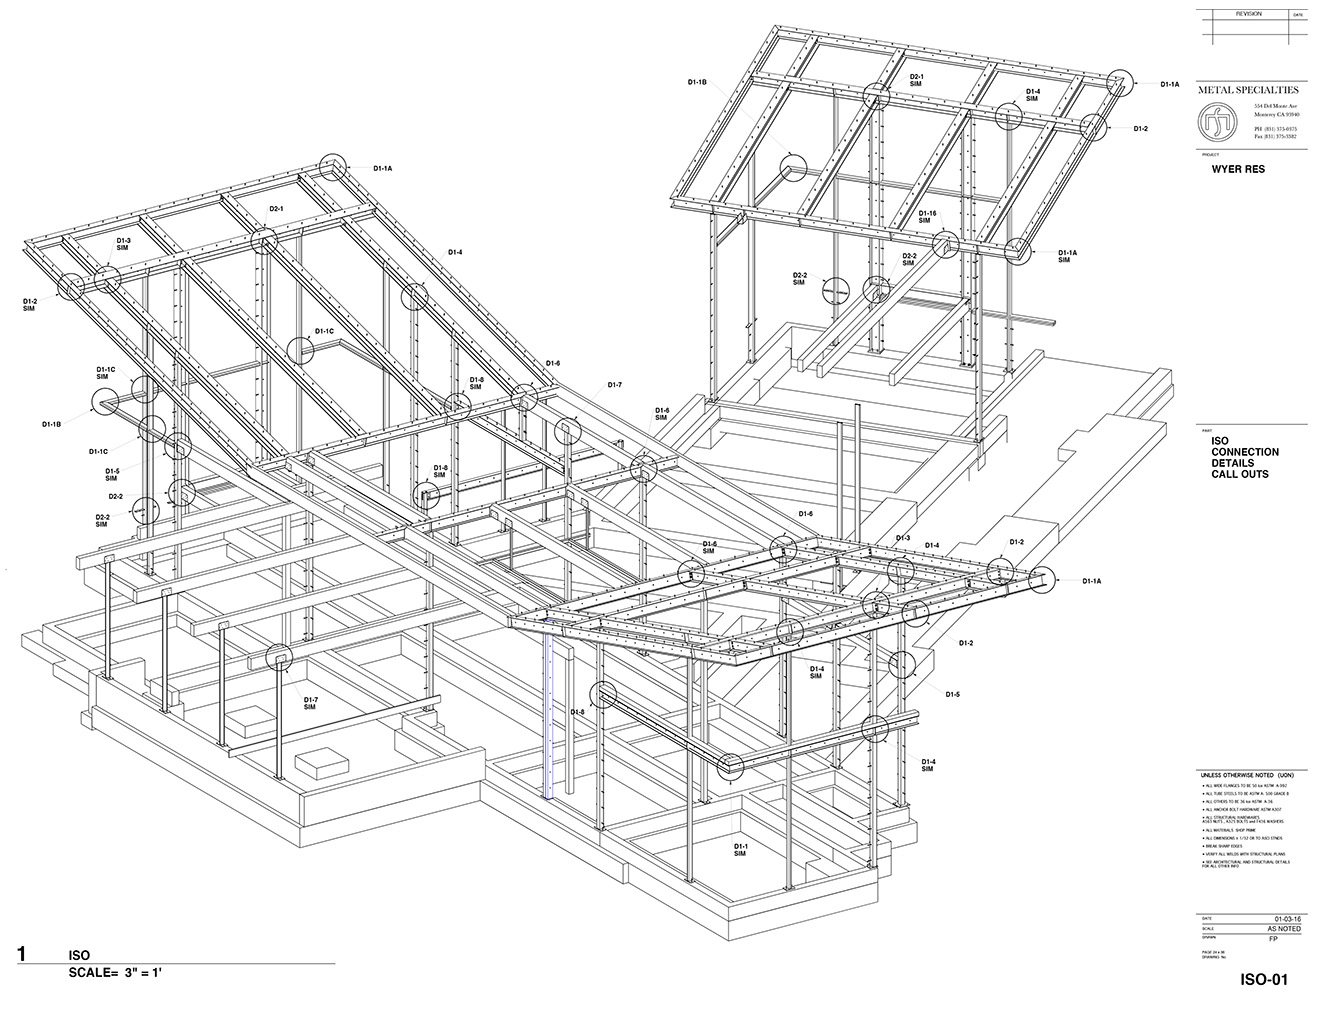 <b>Steel Frame Structure</b><span><br /> Designed by <b><a href='/success-stories/a-3d-pictures-worth-a-thousand-dollars/'>Frank Portschy</a></b> • Created in <a href='/3d-modeling/3d-modeling-cobalt.html'>Cobalt CAD & 3D Modeling Software</a></span>